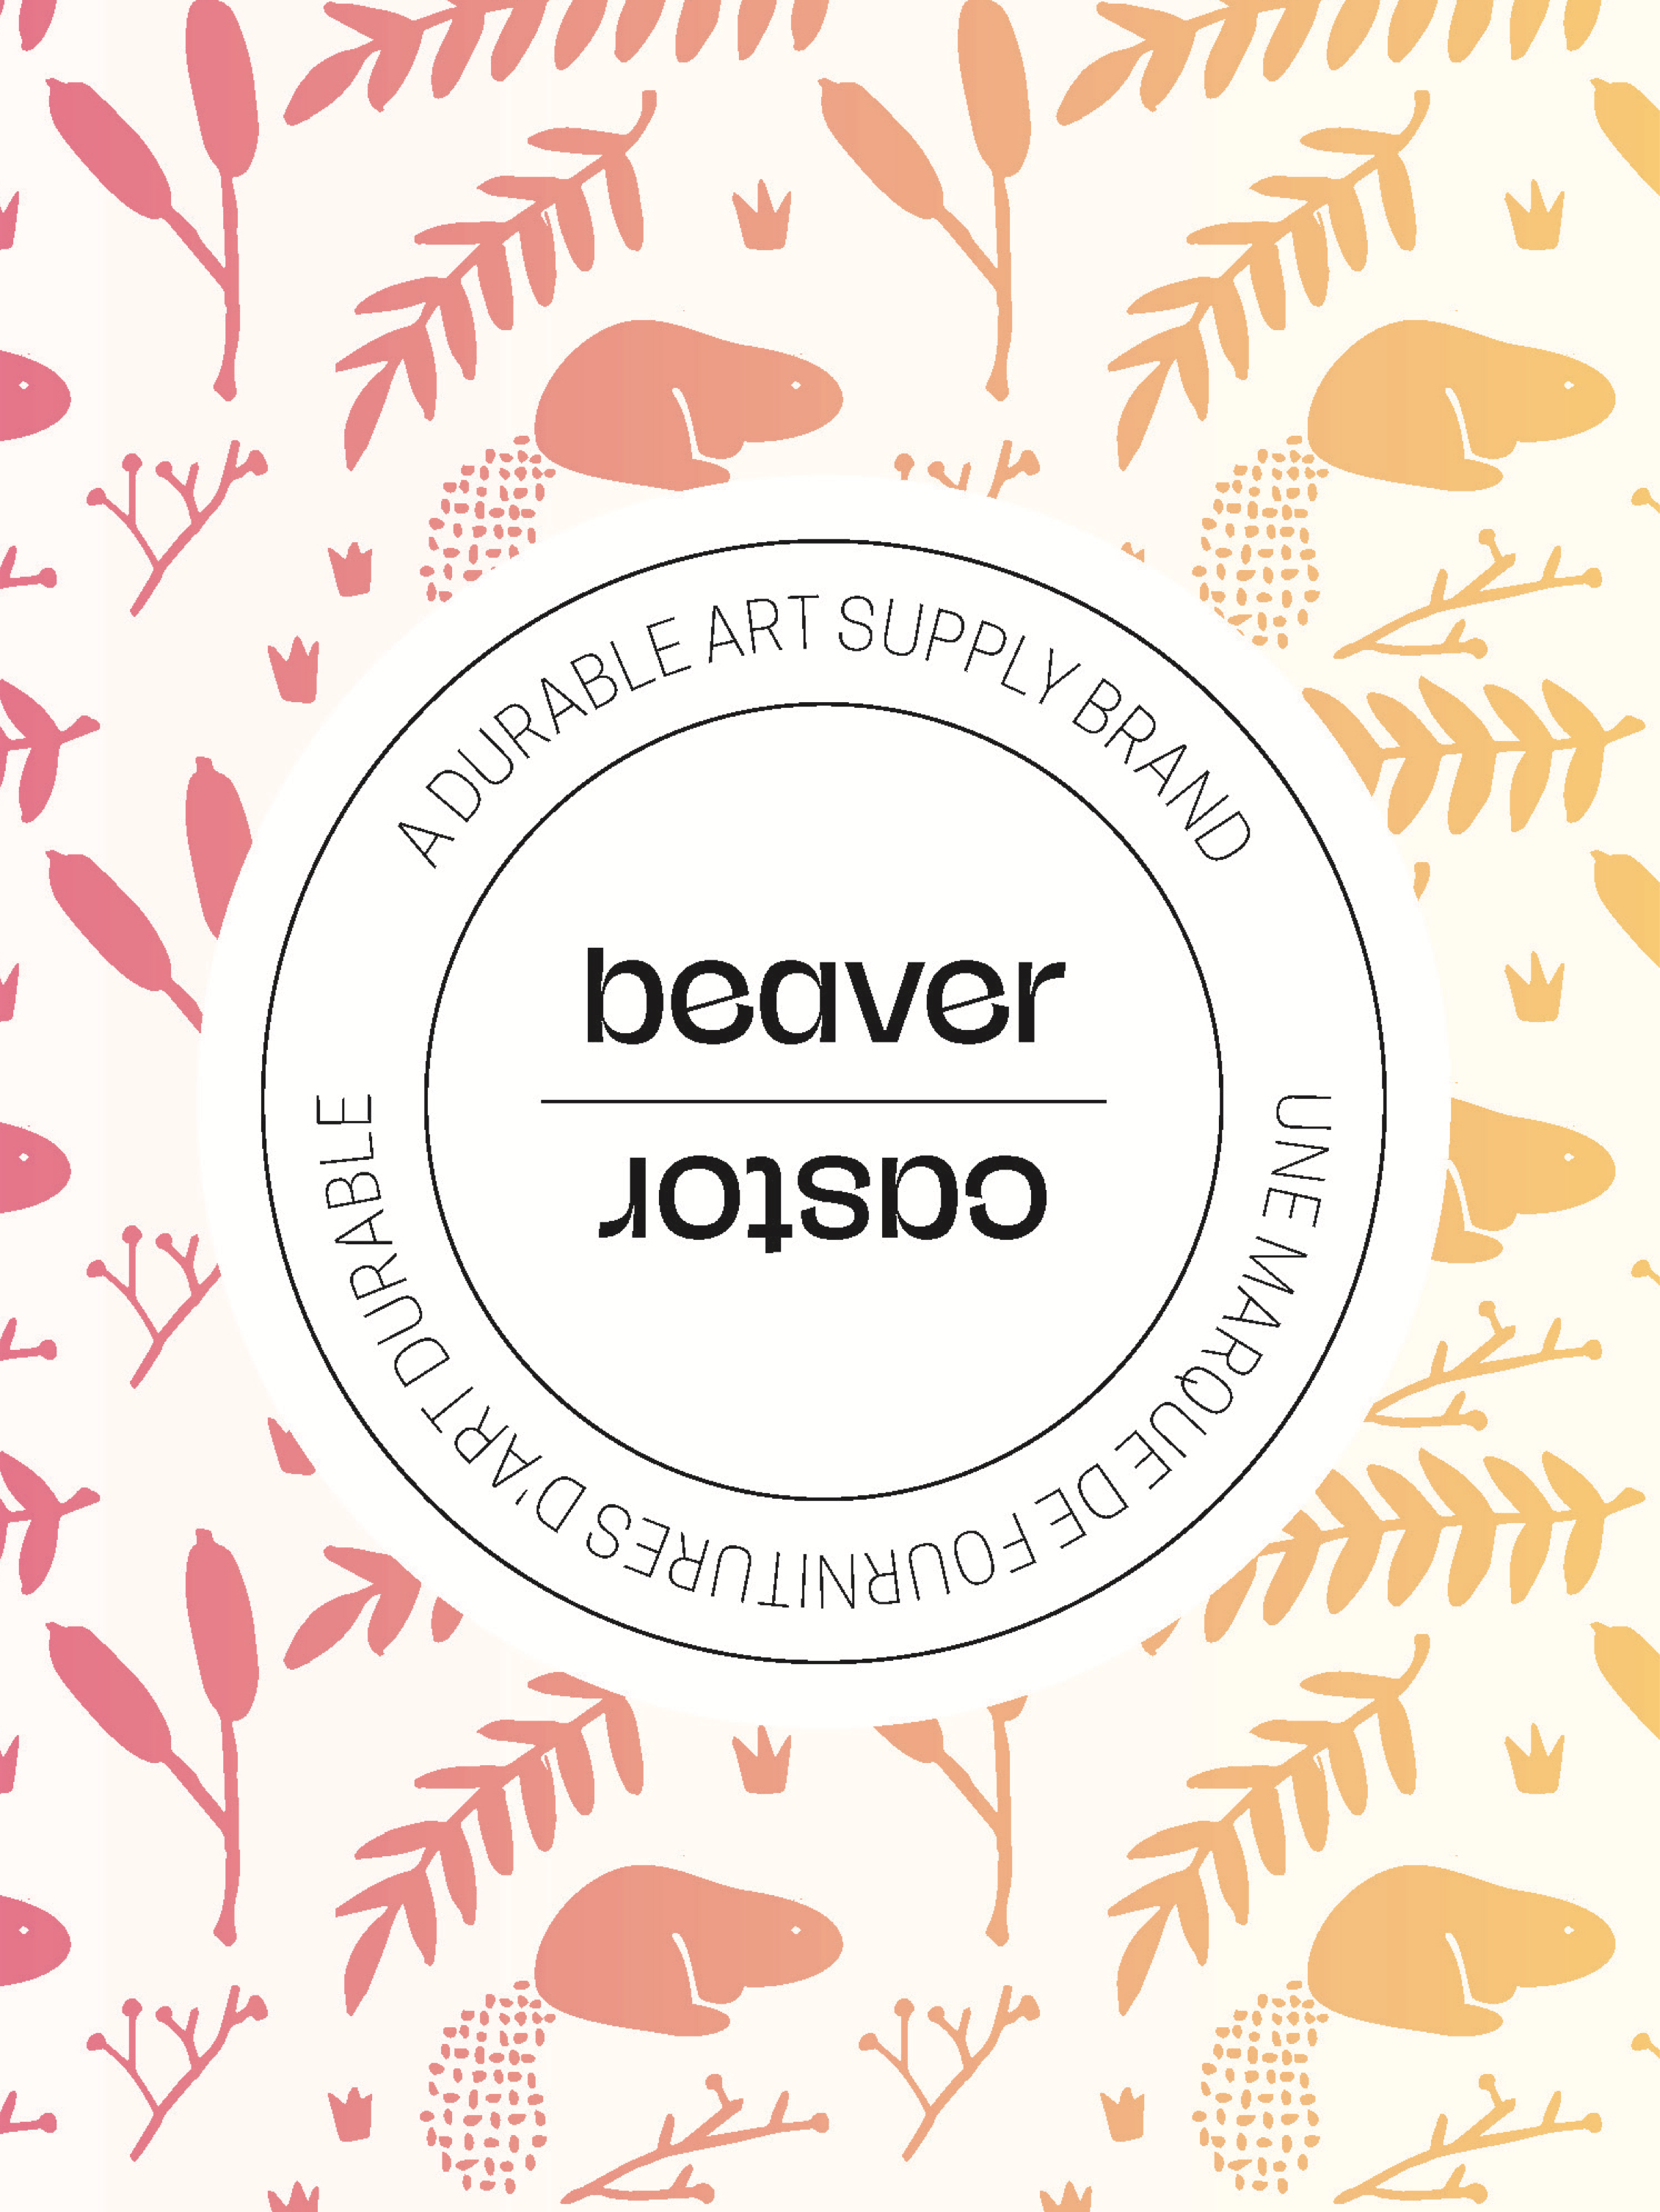 The branding for Beaver Art Supplies with illustrations of beavers, cat tails, and ferns in the background.